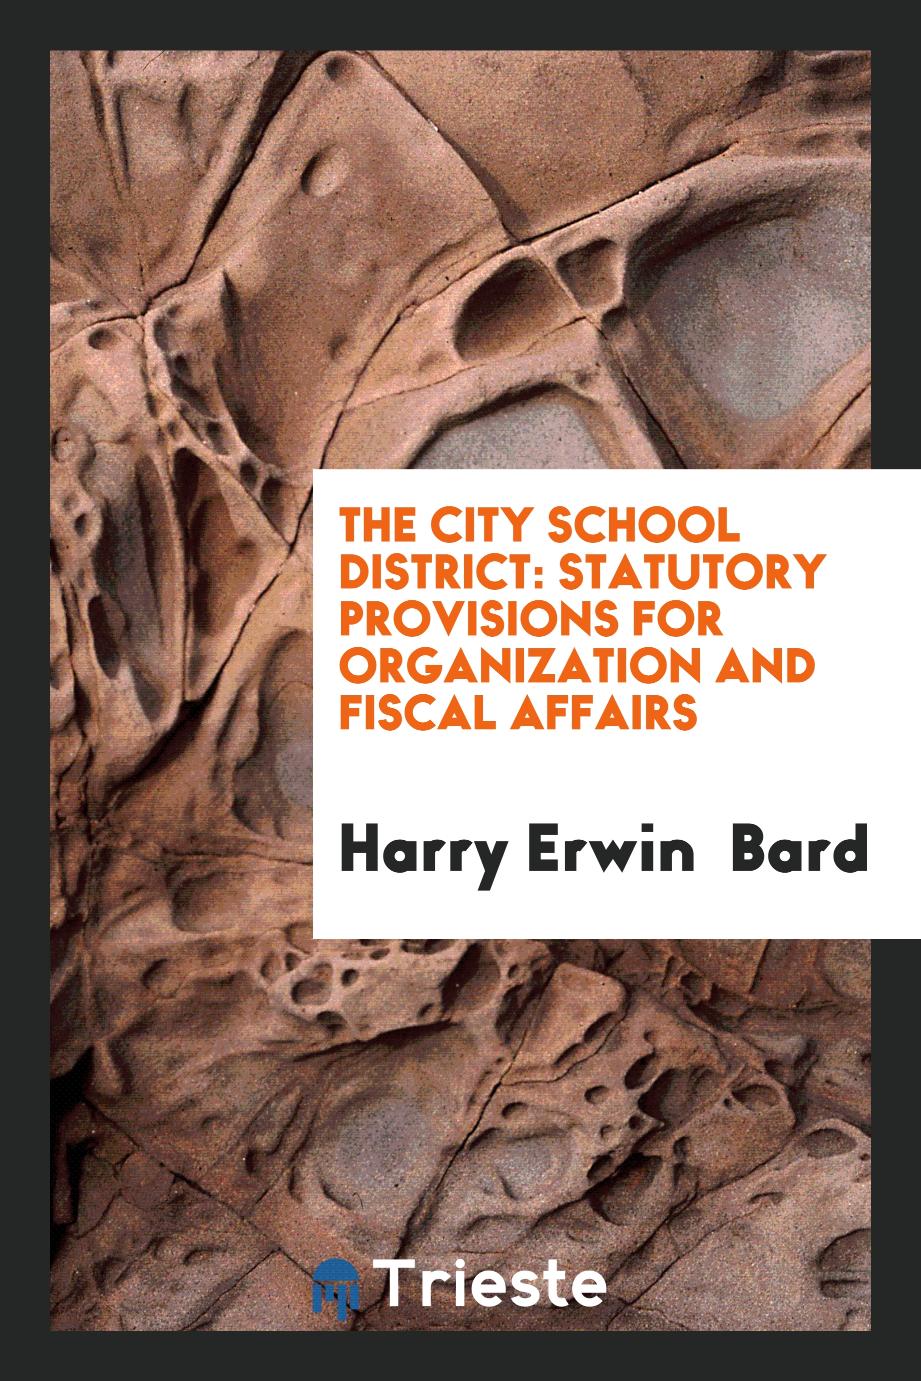 The City School District: Statutory Provisions for Organization and Fiscal Affairs